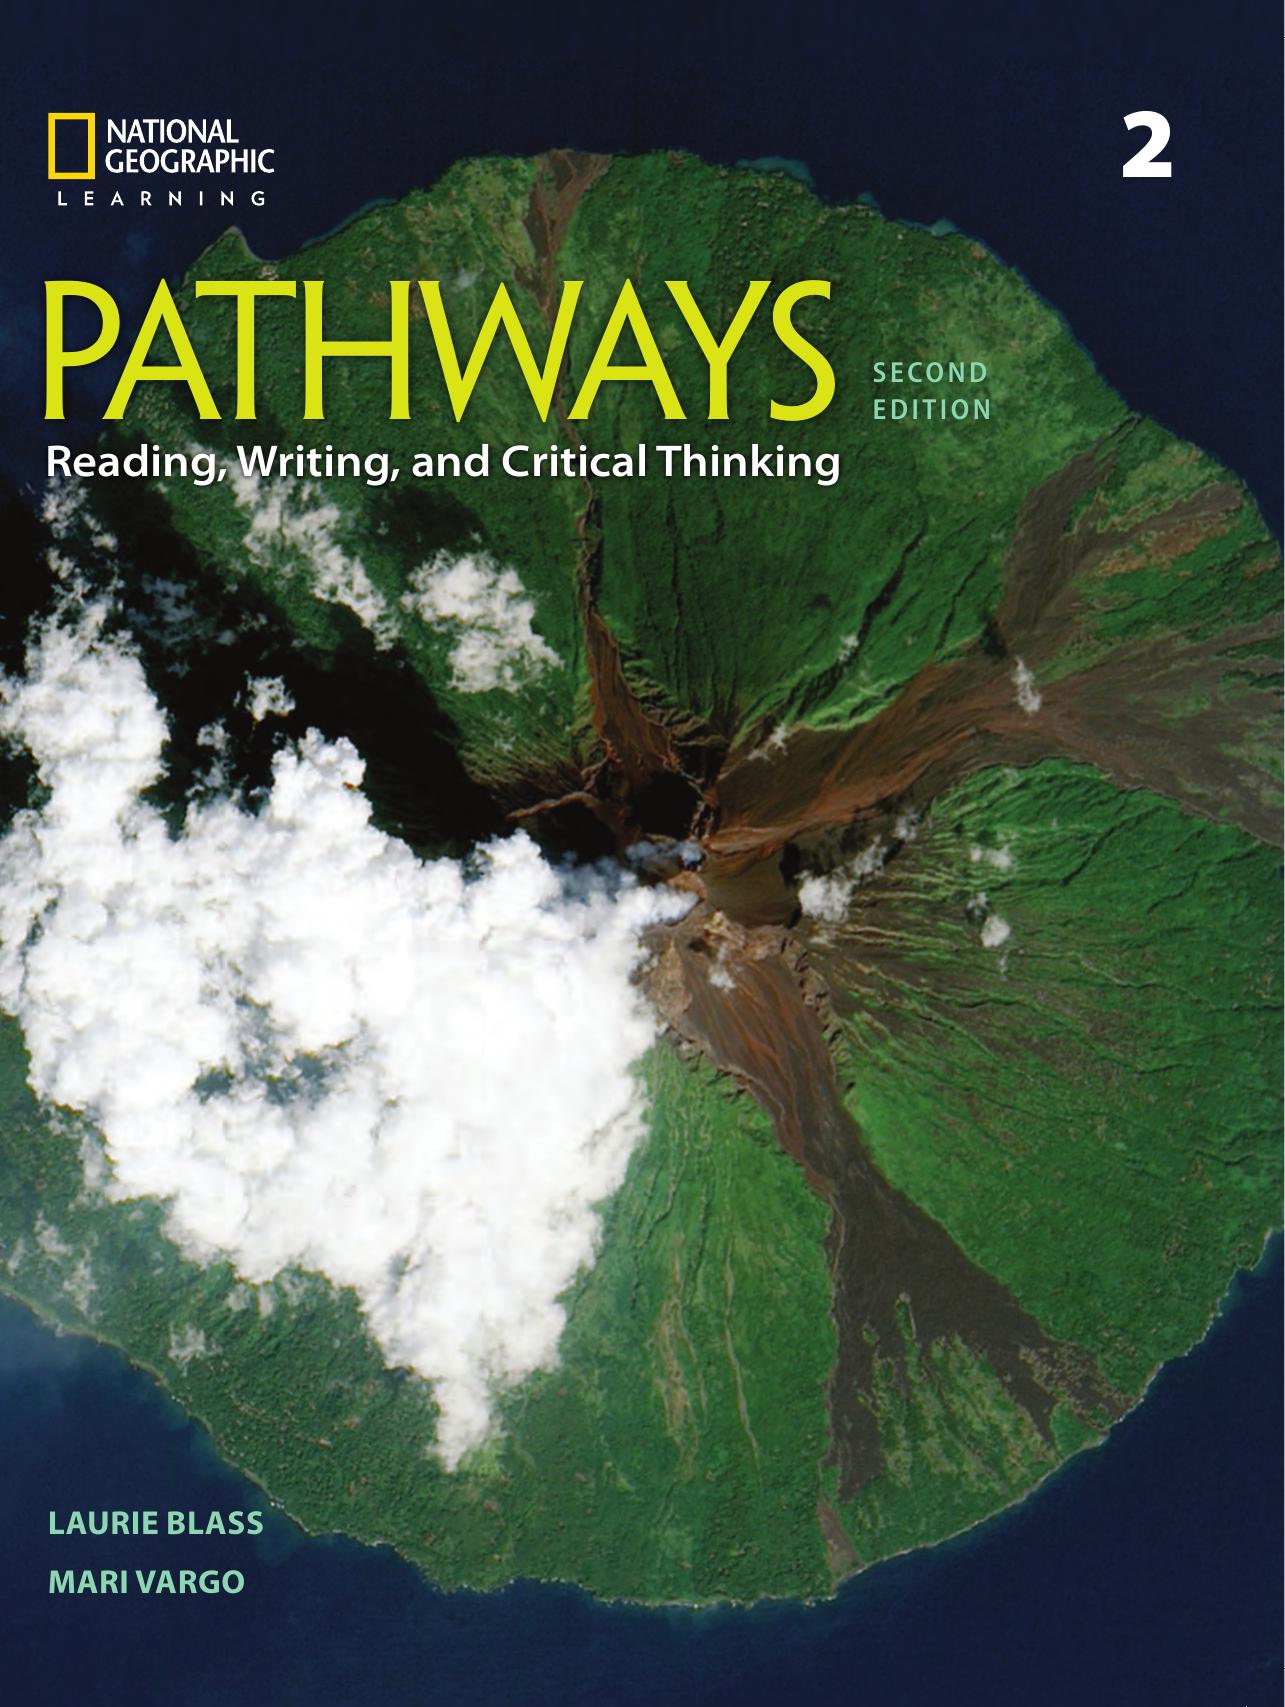 Pathways Reading, Writing, and Critical Thinking 2 by  Laurie Blass , Mari Vargo